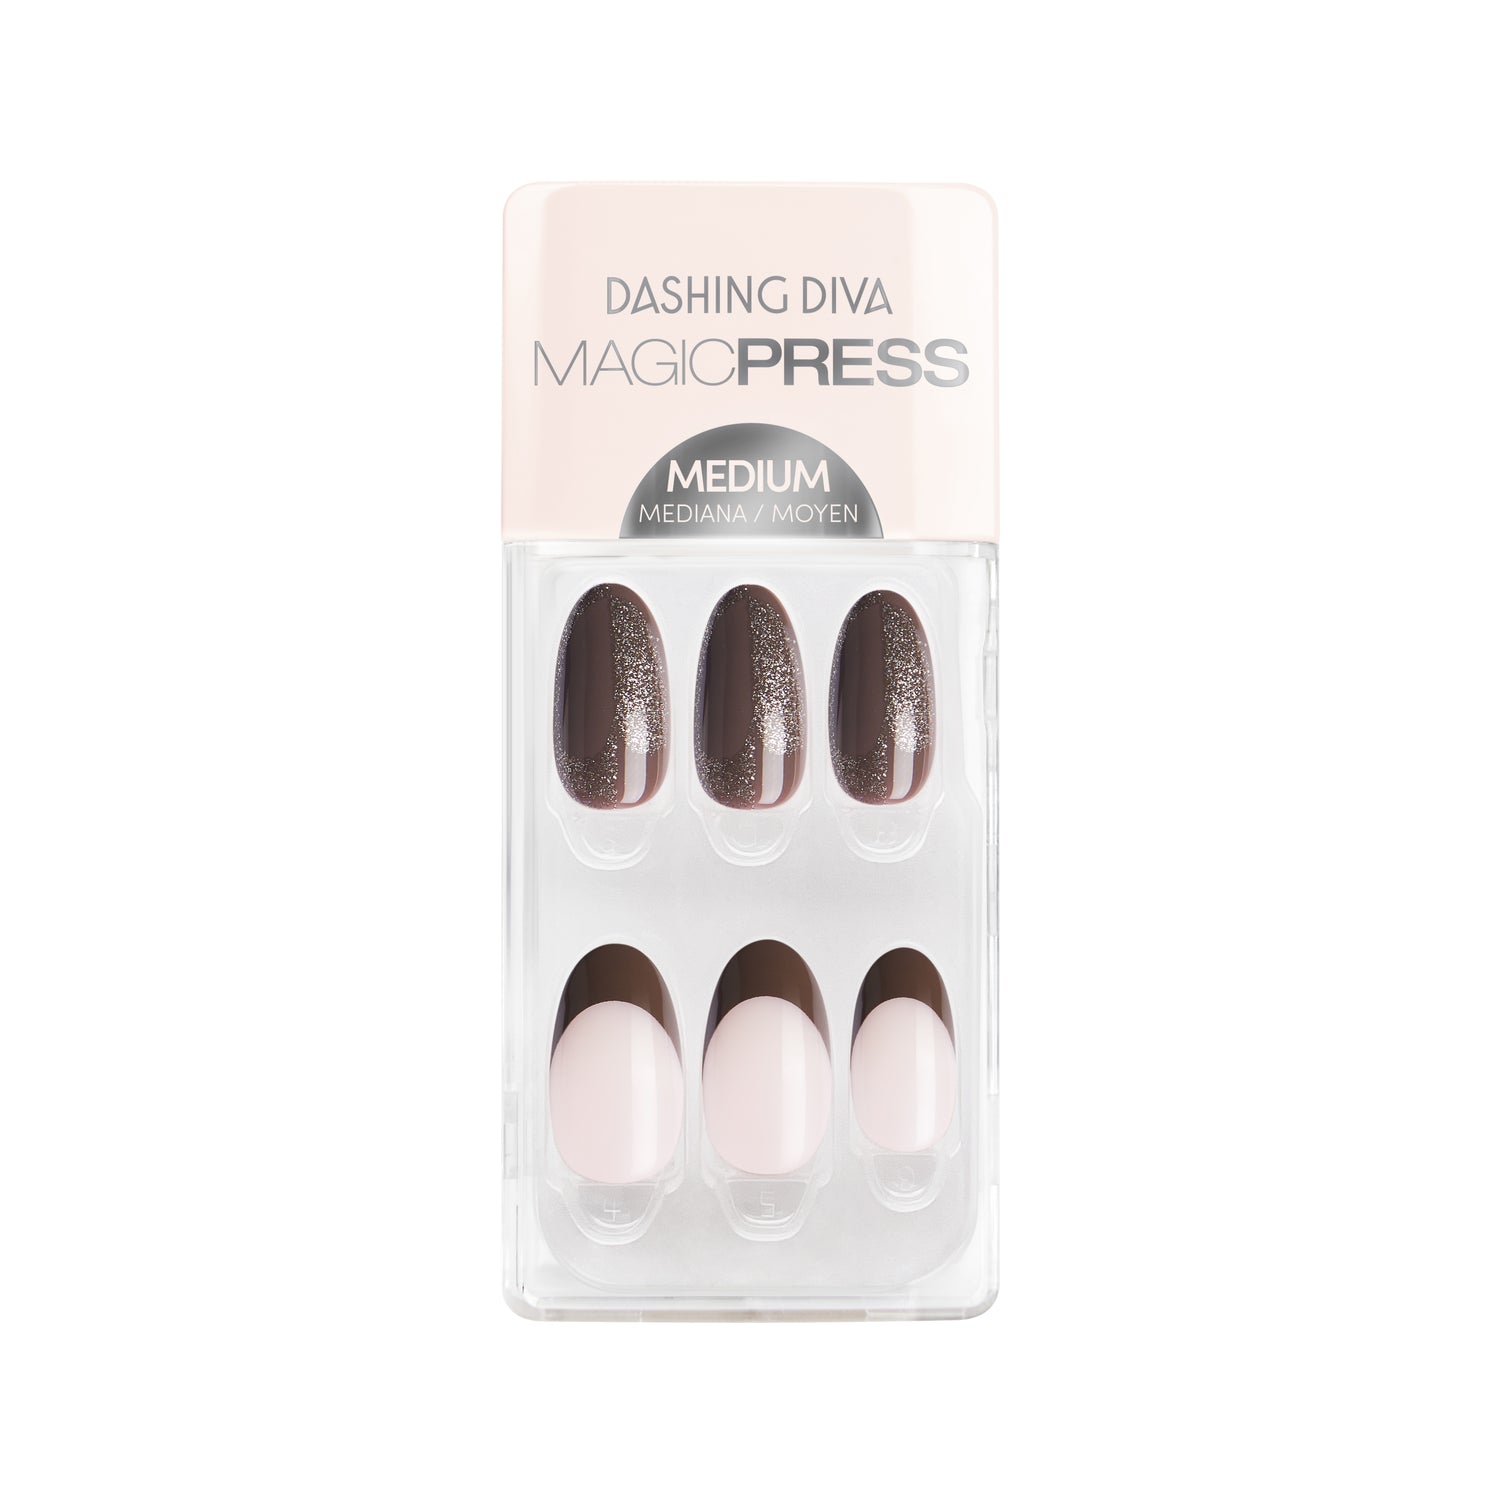 Medium length, almond shape, glossy finish. Cocoa brown & semi-sheer nude press-on gel nails featuring cocoa brown french tips and champagne glitter.